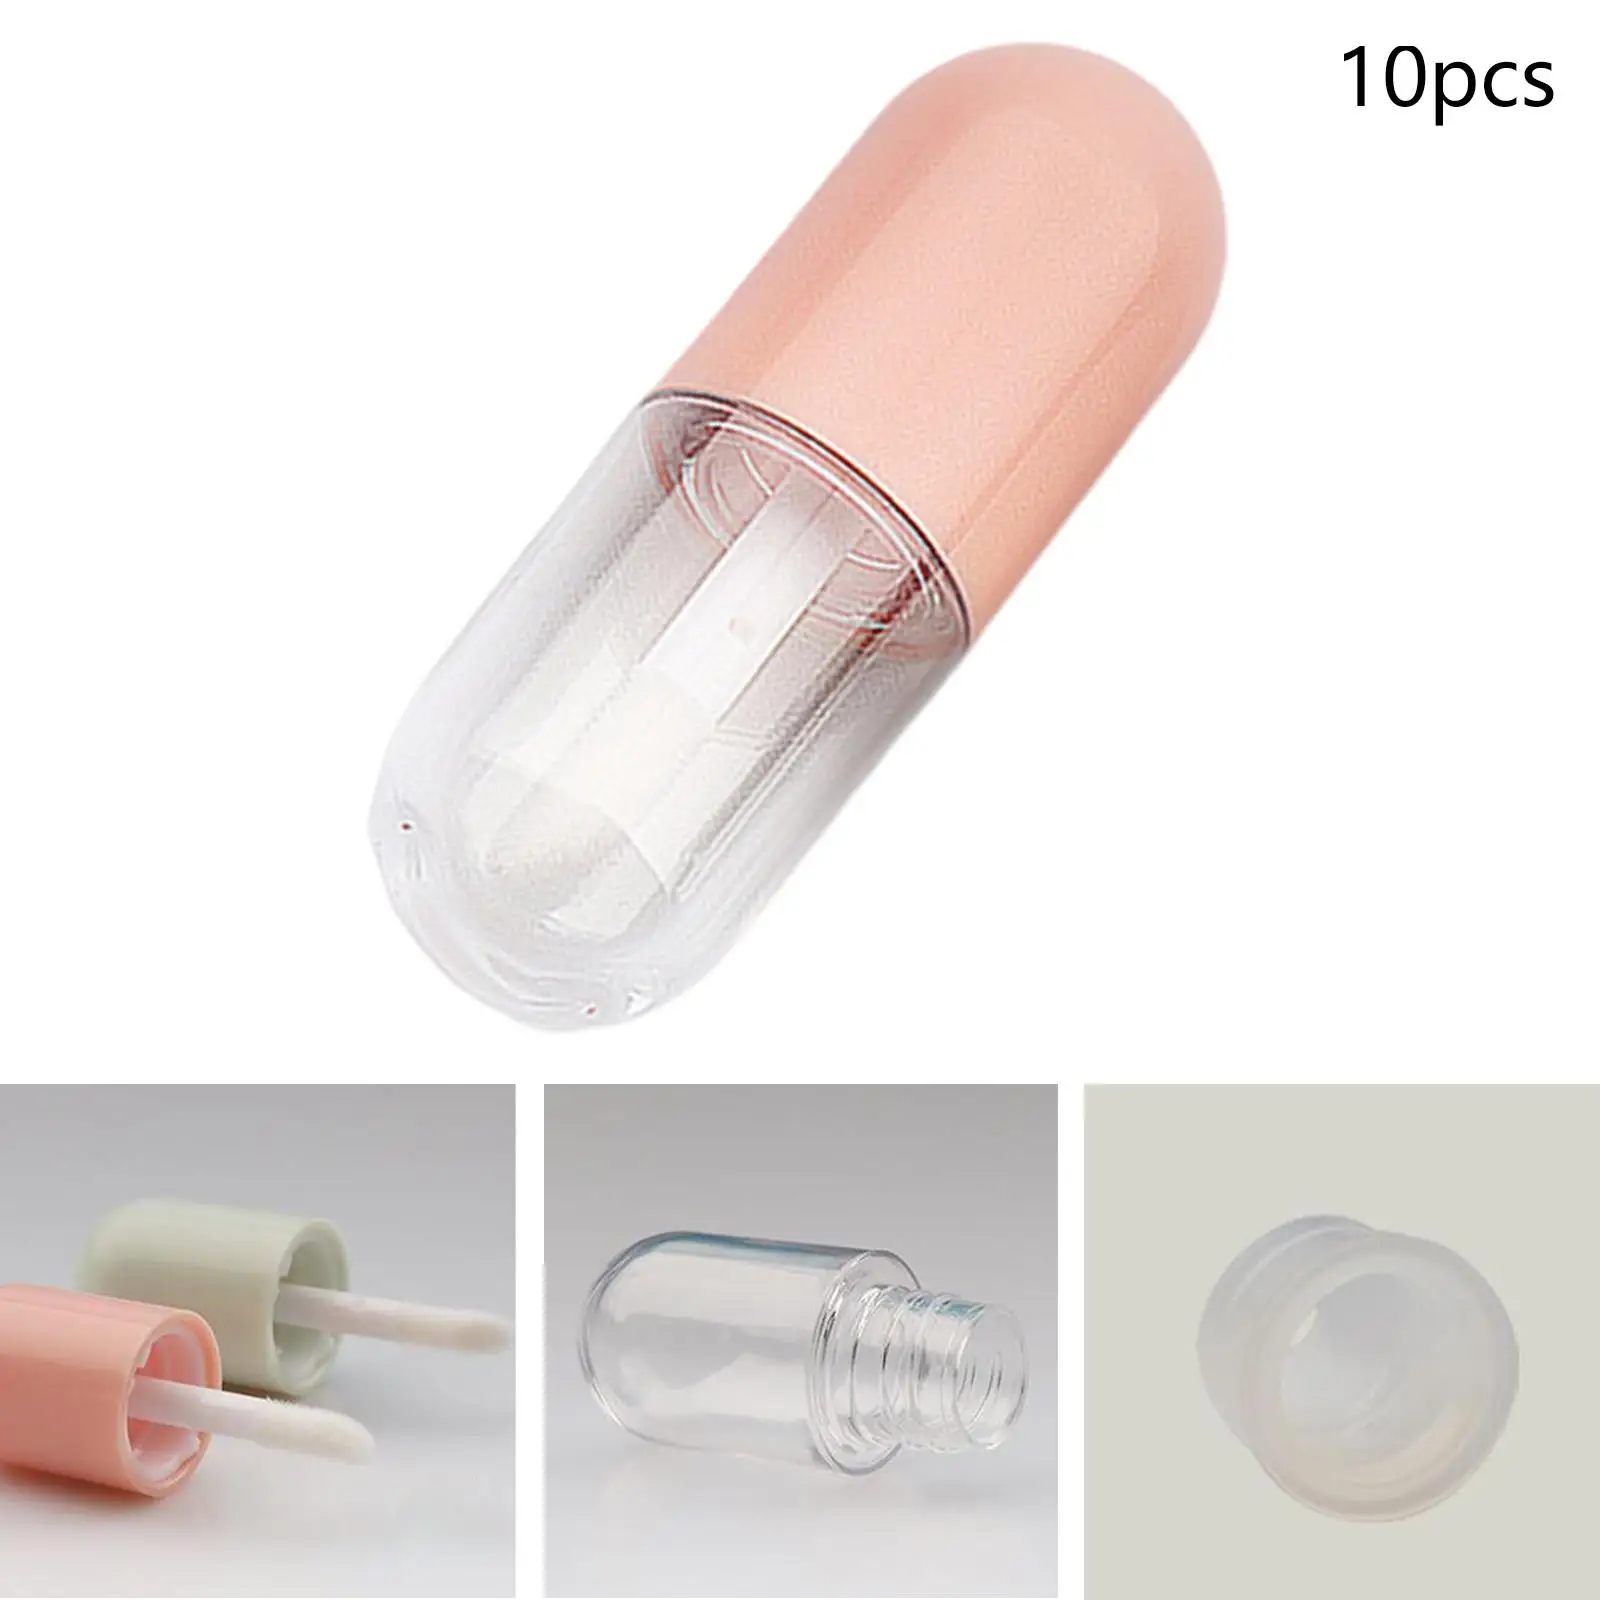 10x  Container with Insert Stoppers Adorable  Holder Samples Bottle Balm Tubes for DIY Cosmetic Samples Travel Women Girl